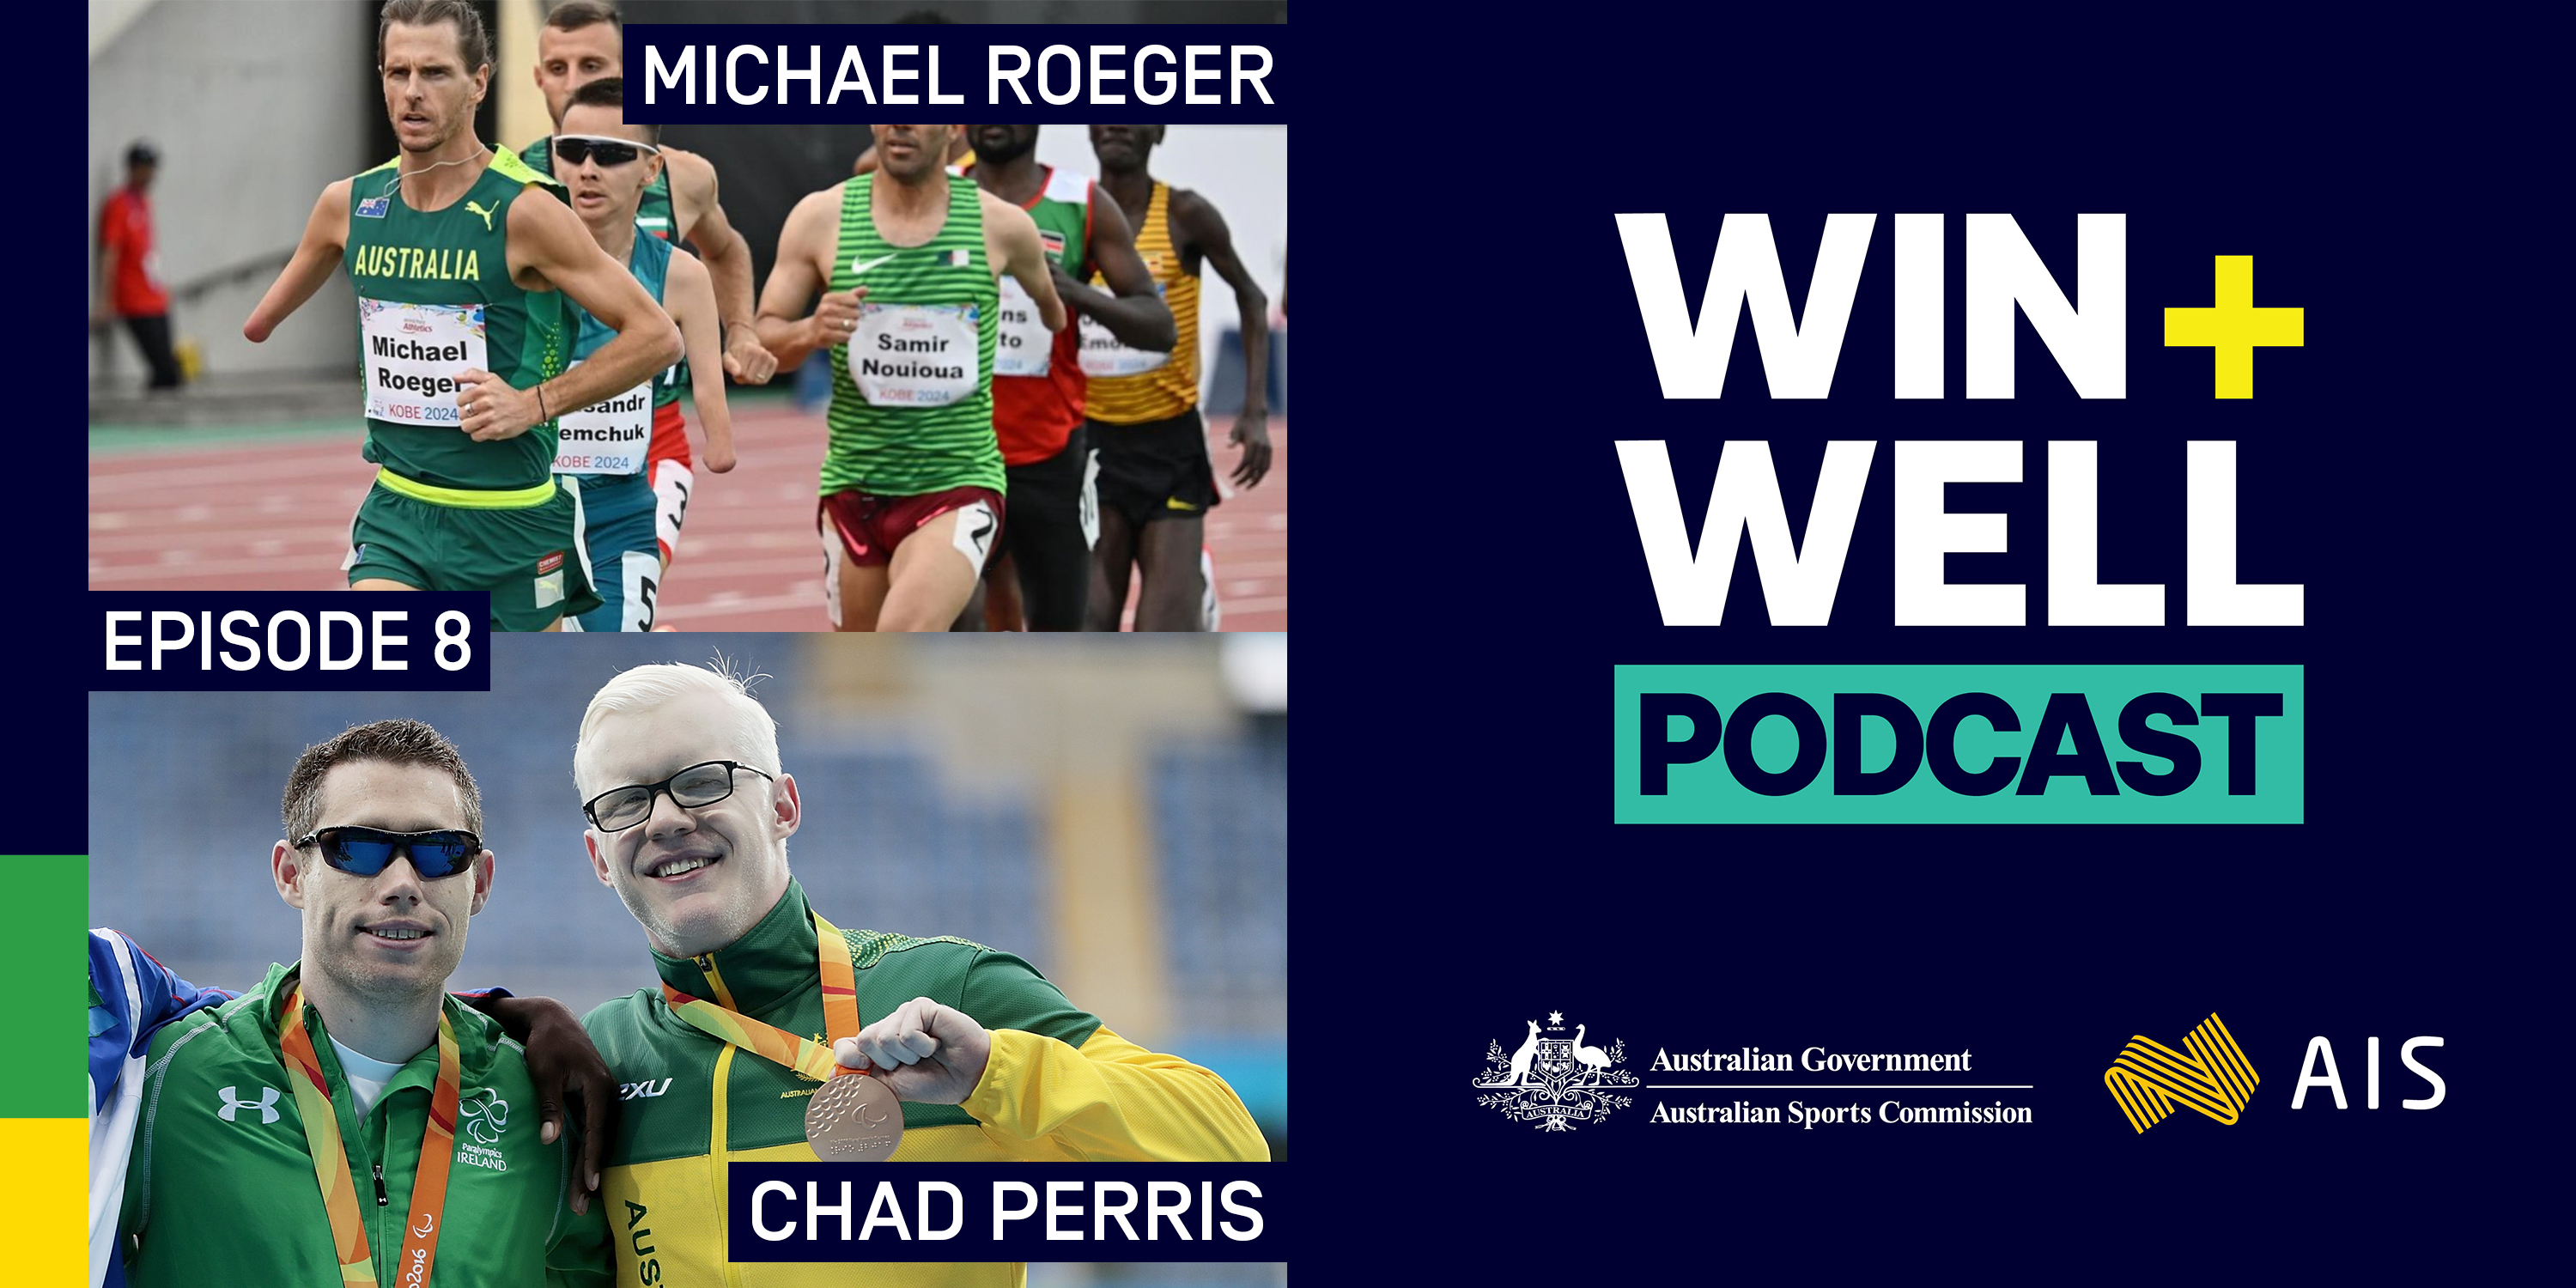 AIS Win Well Podcast Chad Perris and Michael Roeger